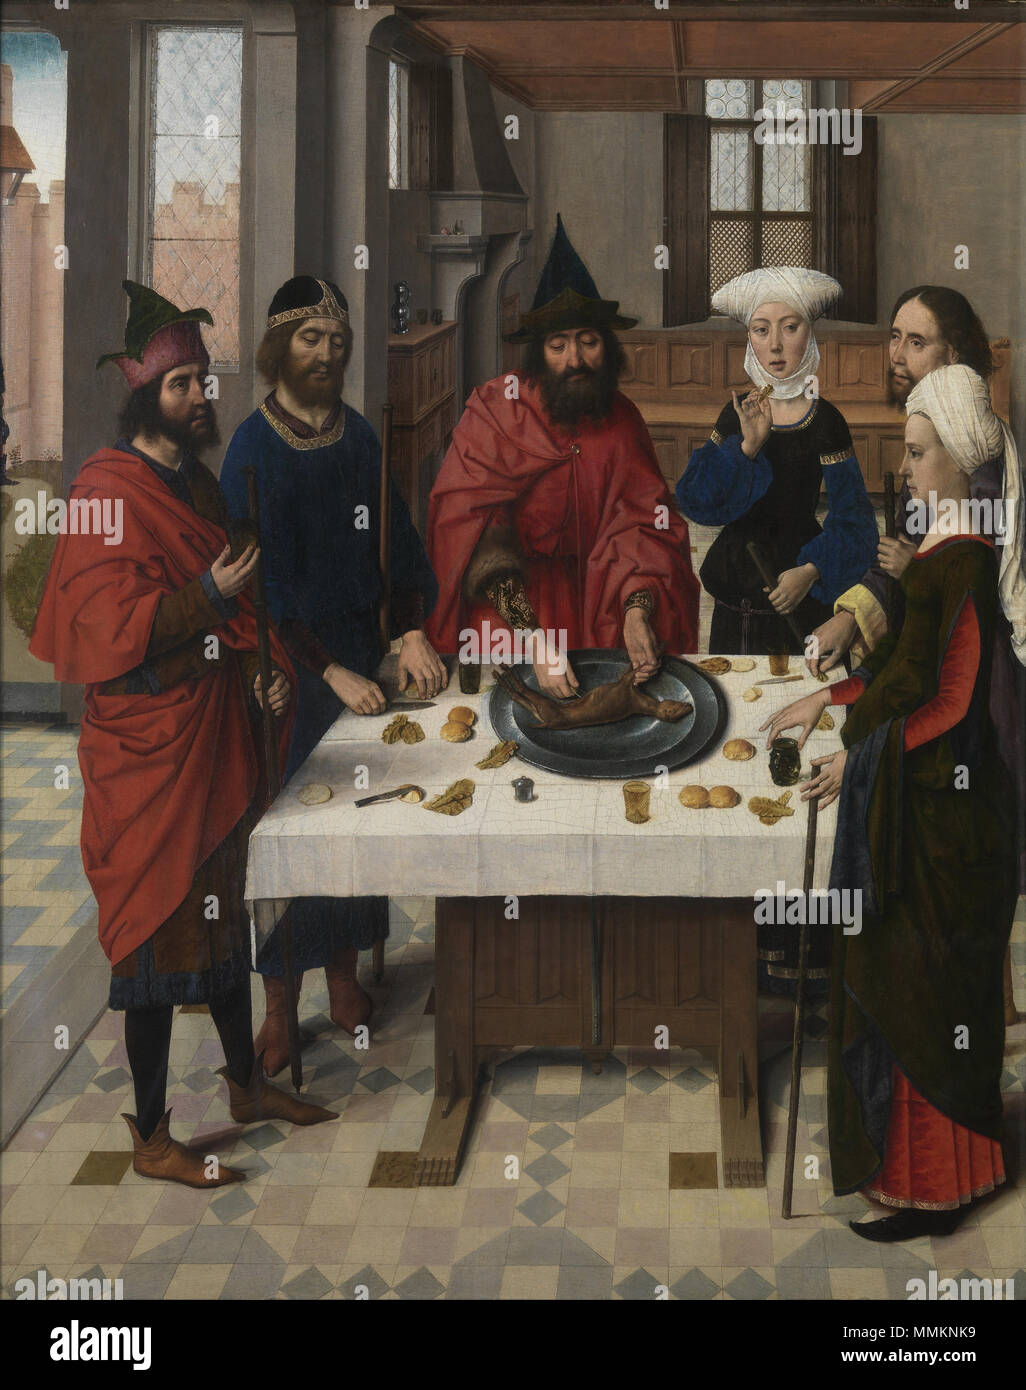 The Feast of the Passover. between 1464 and 1467. Dieric Bouts - The Feast of the Passover - WGA03013 Stock Photo